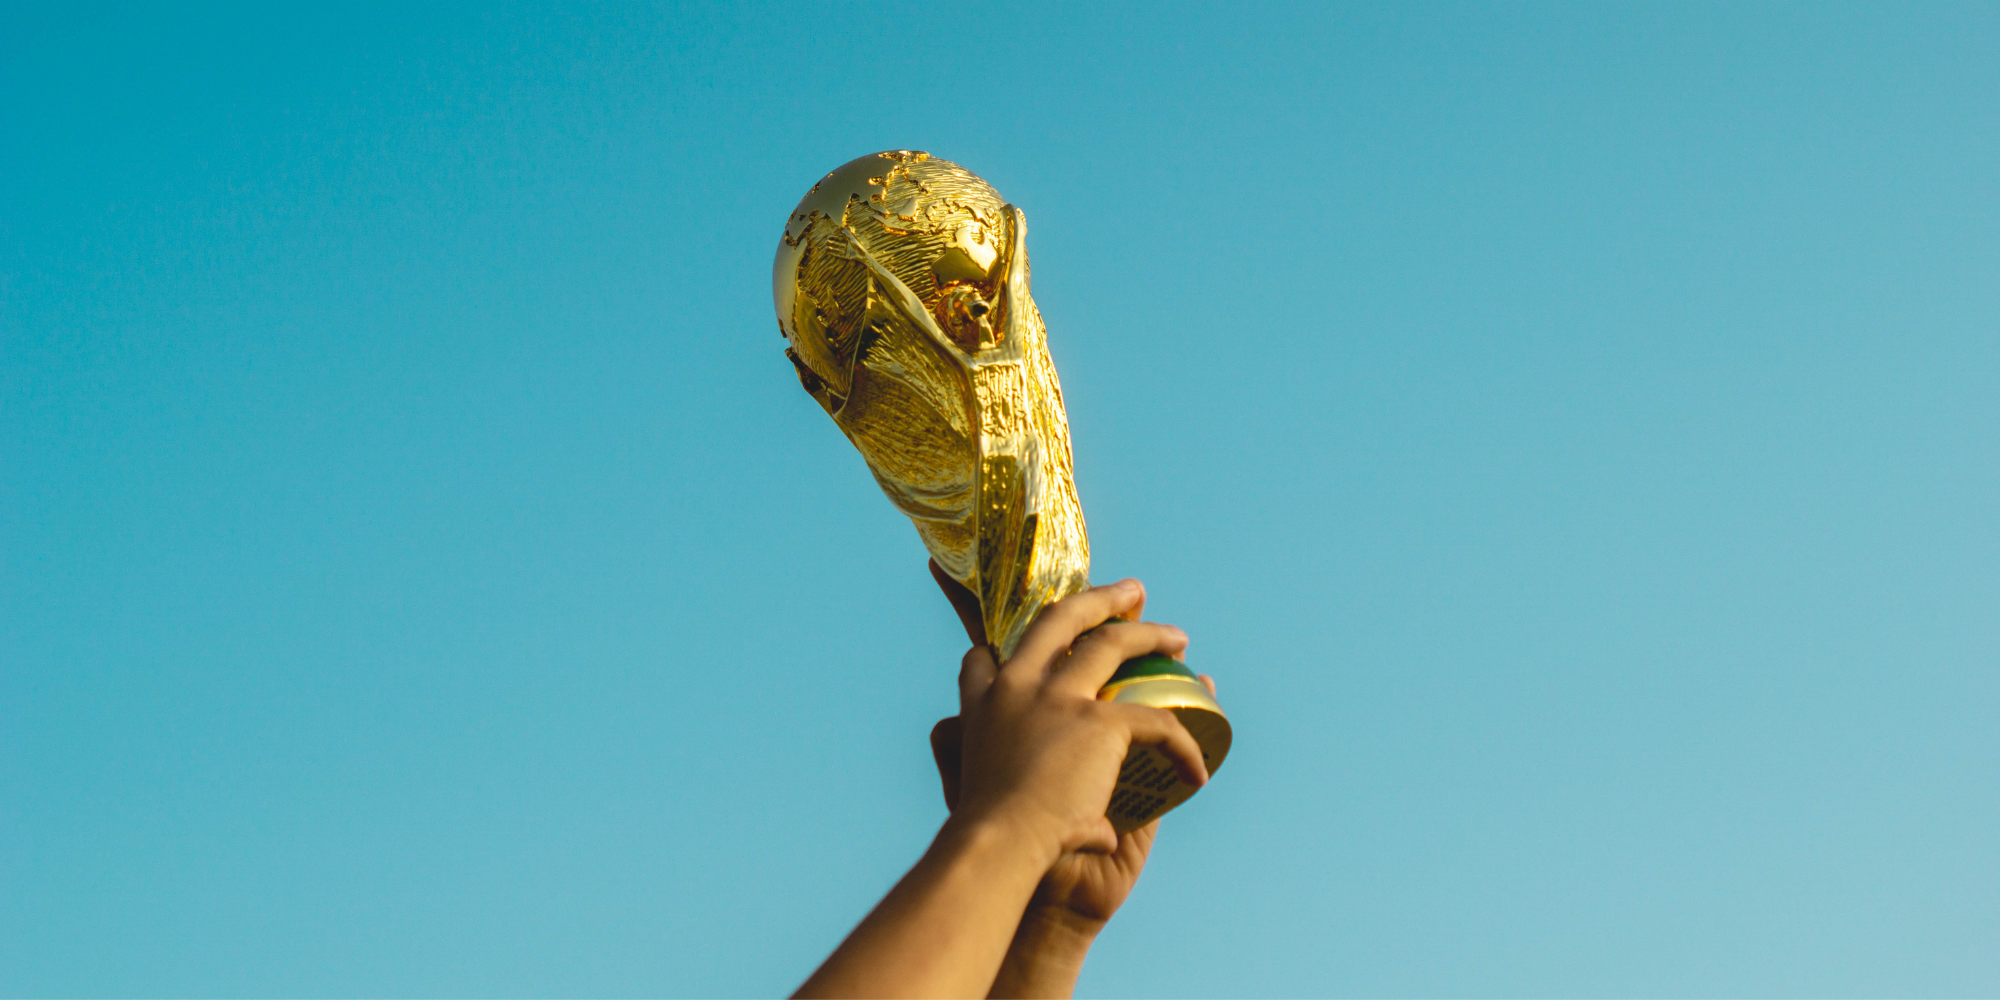 Marketing and Morals: The Qatar World Cup